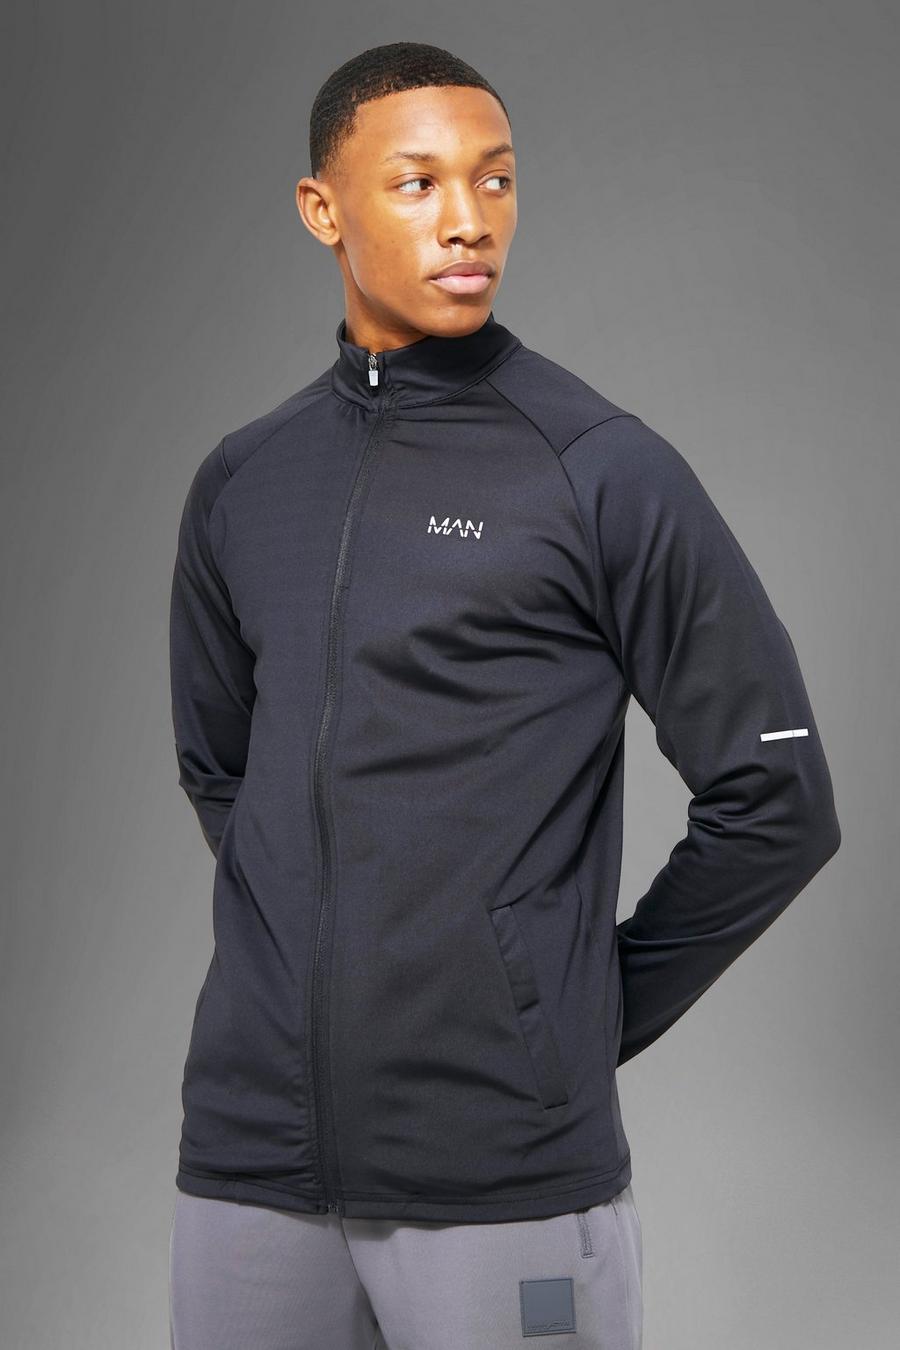 Mens Workout Pullovers | Men's Workout Hoodies | boohoo